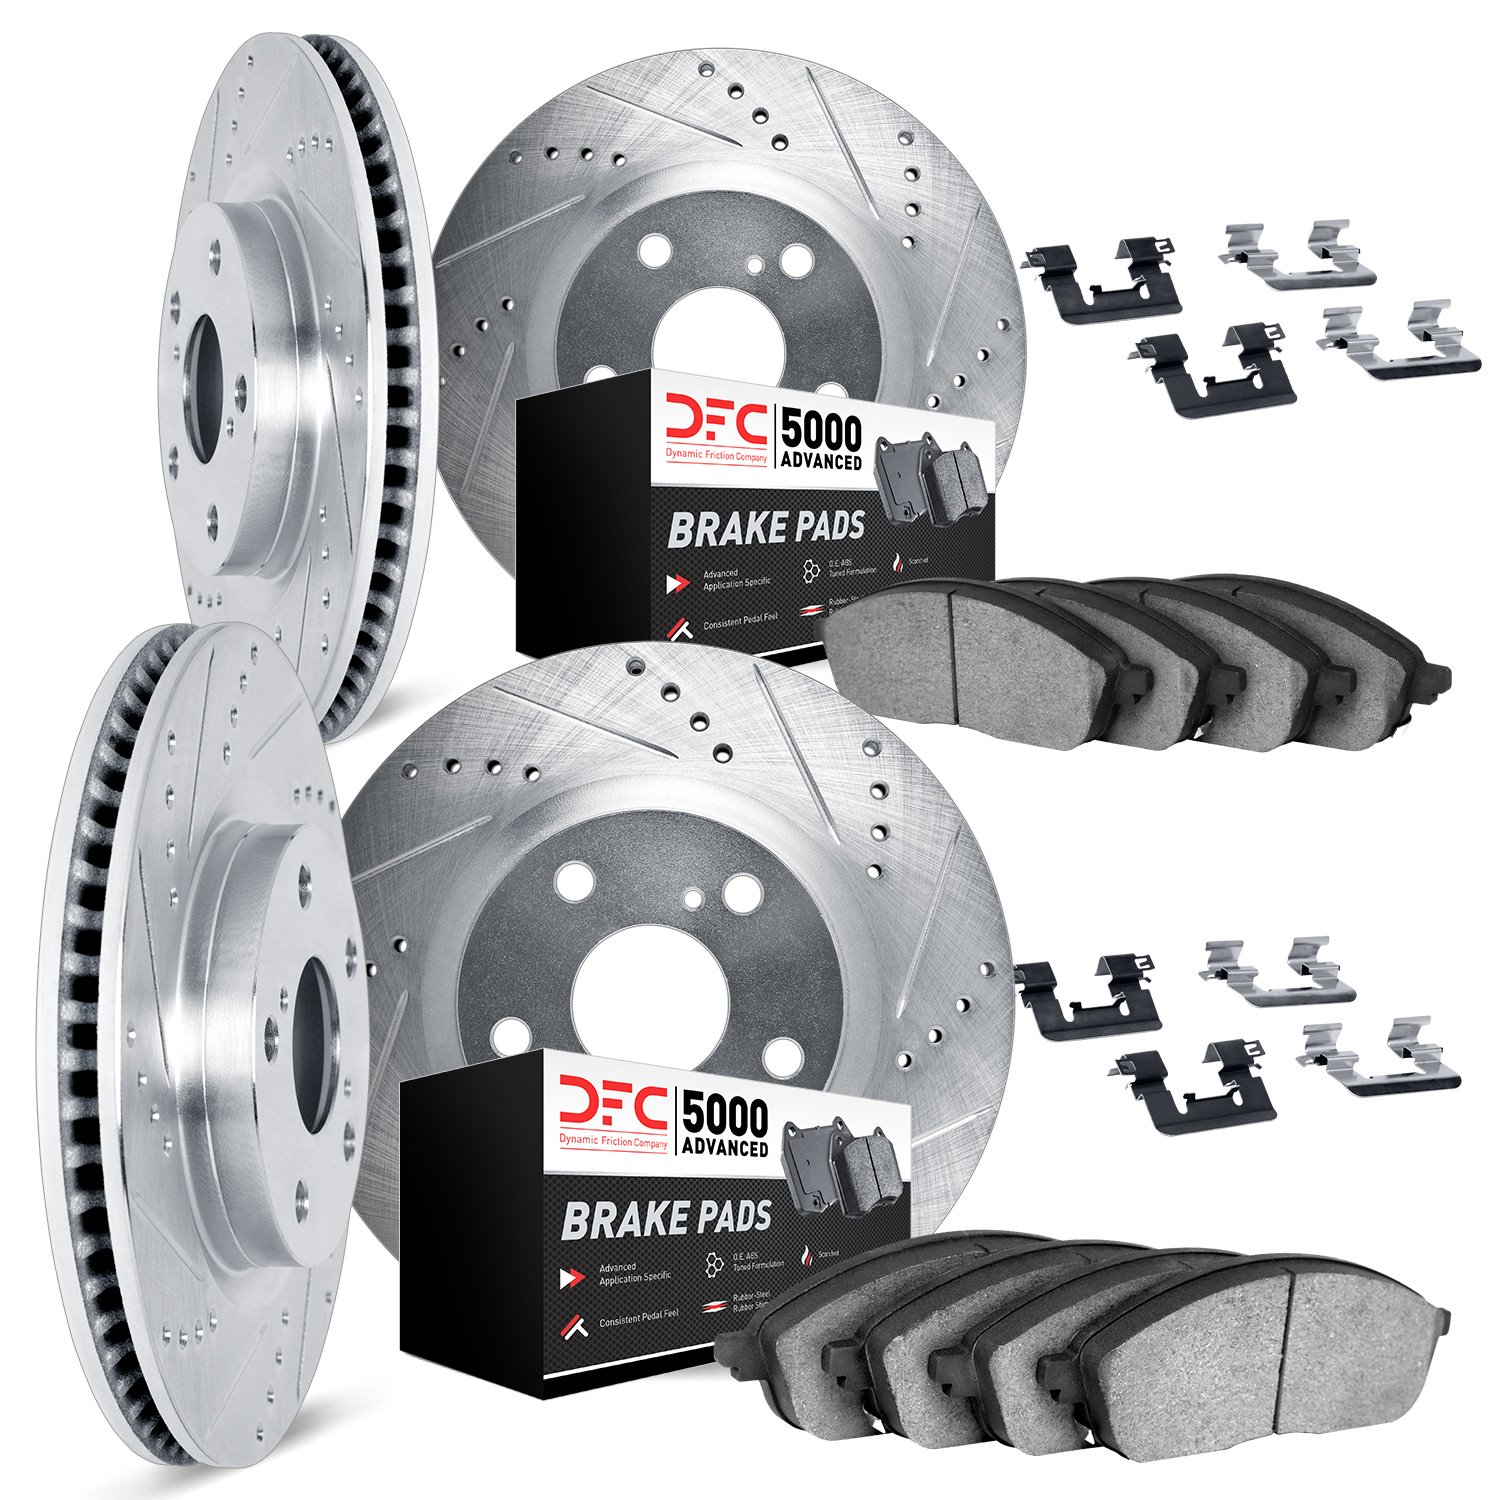 7514-11018 Drilled/Slotted Brake Rotors w/5000 Advanced Brake Pads Kit & Hardware [Silver], 2017-2017 Land Rover, Position: Fron